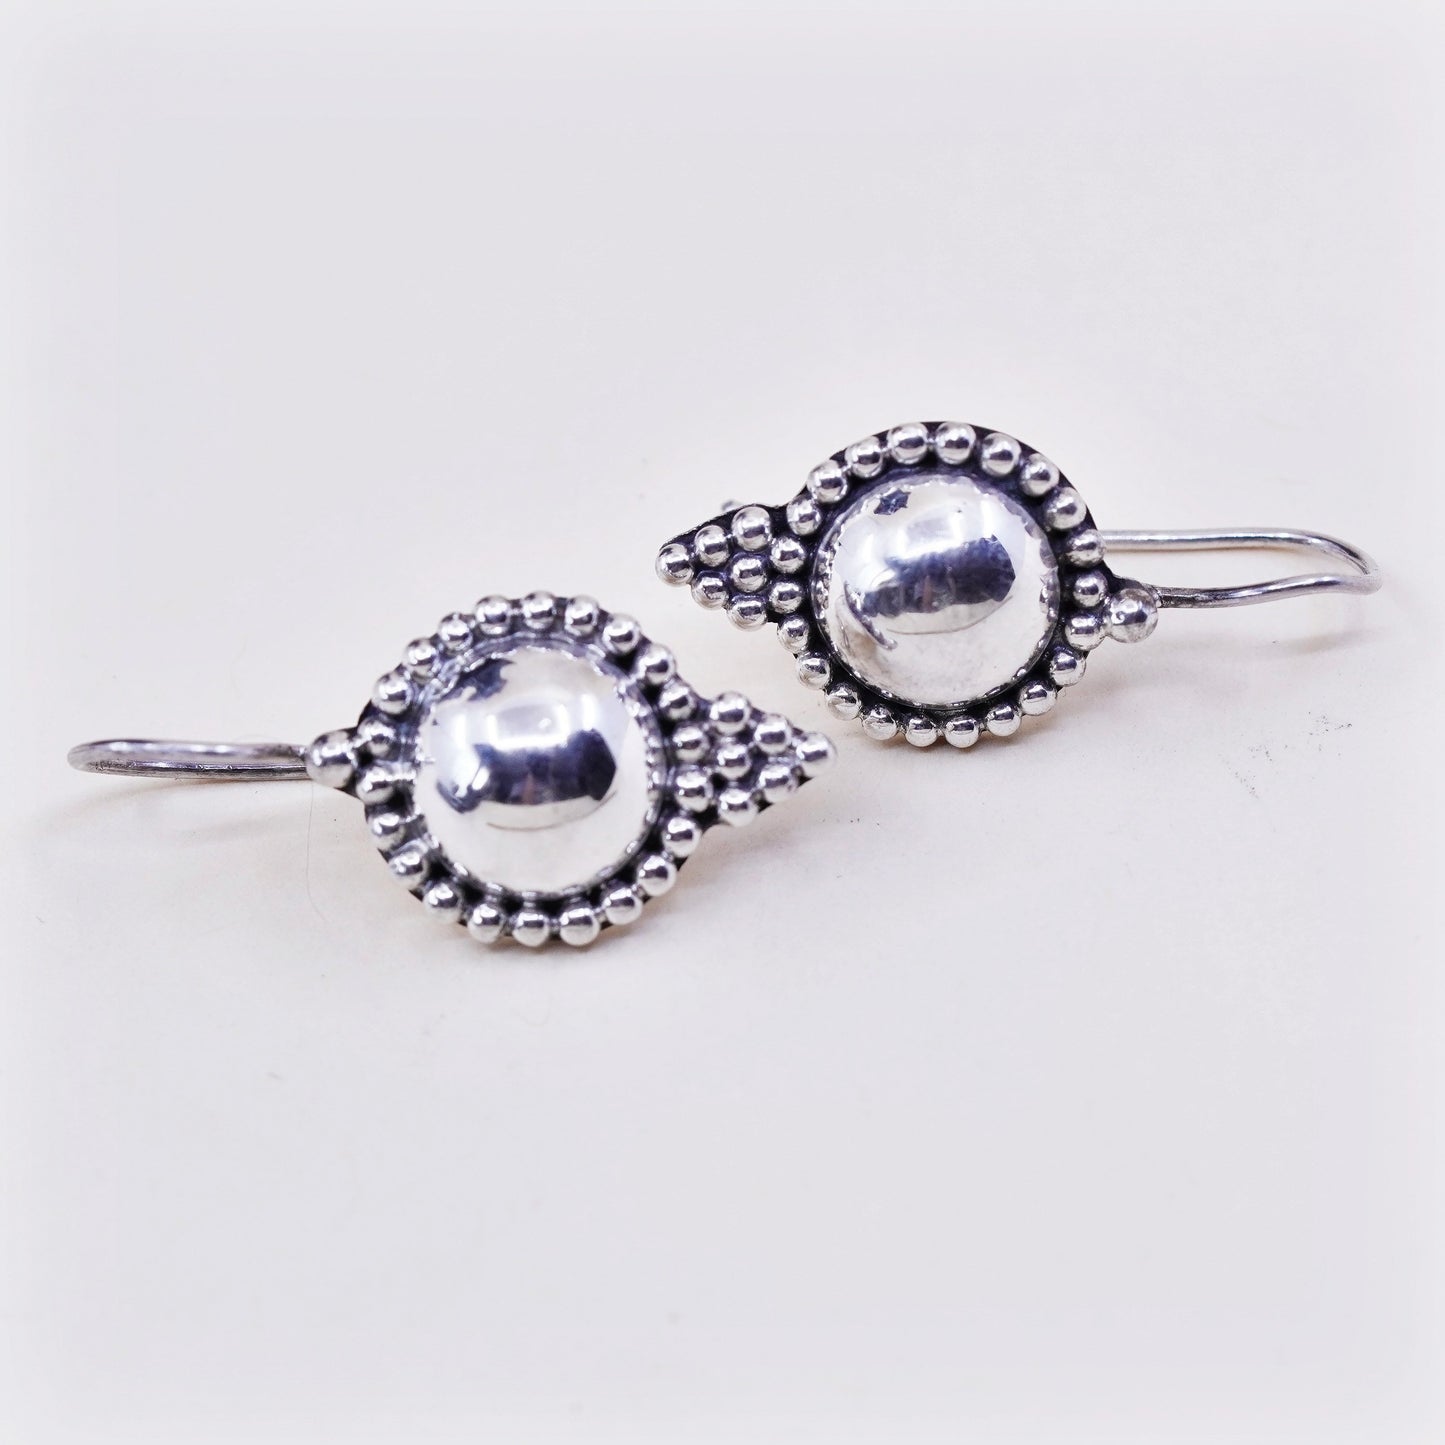 Vintage Sterling silver handmade earrings, 925 circle dangles with beads